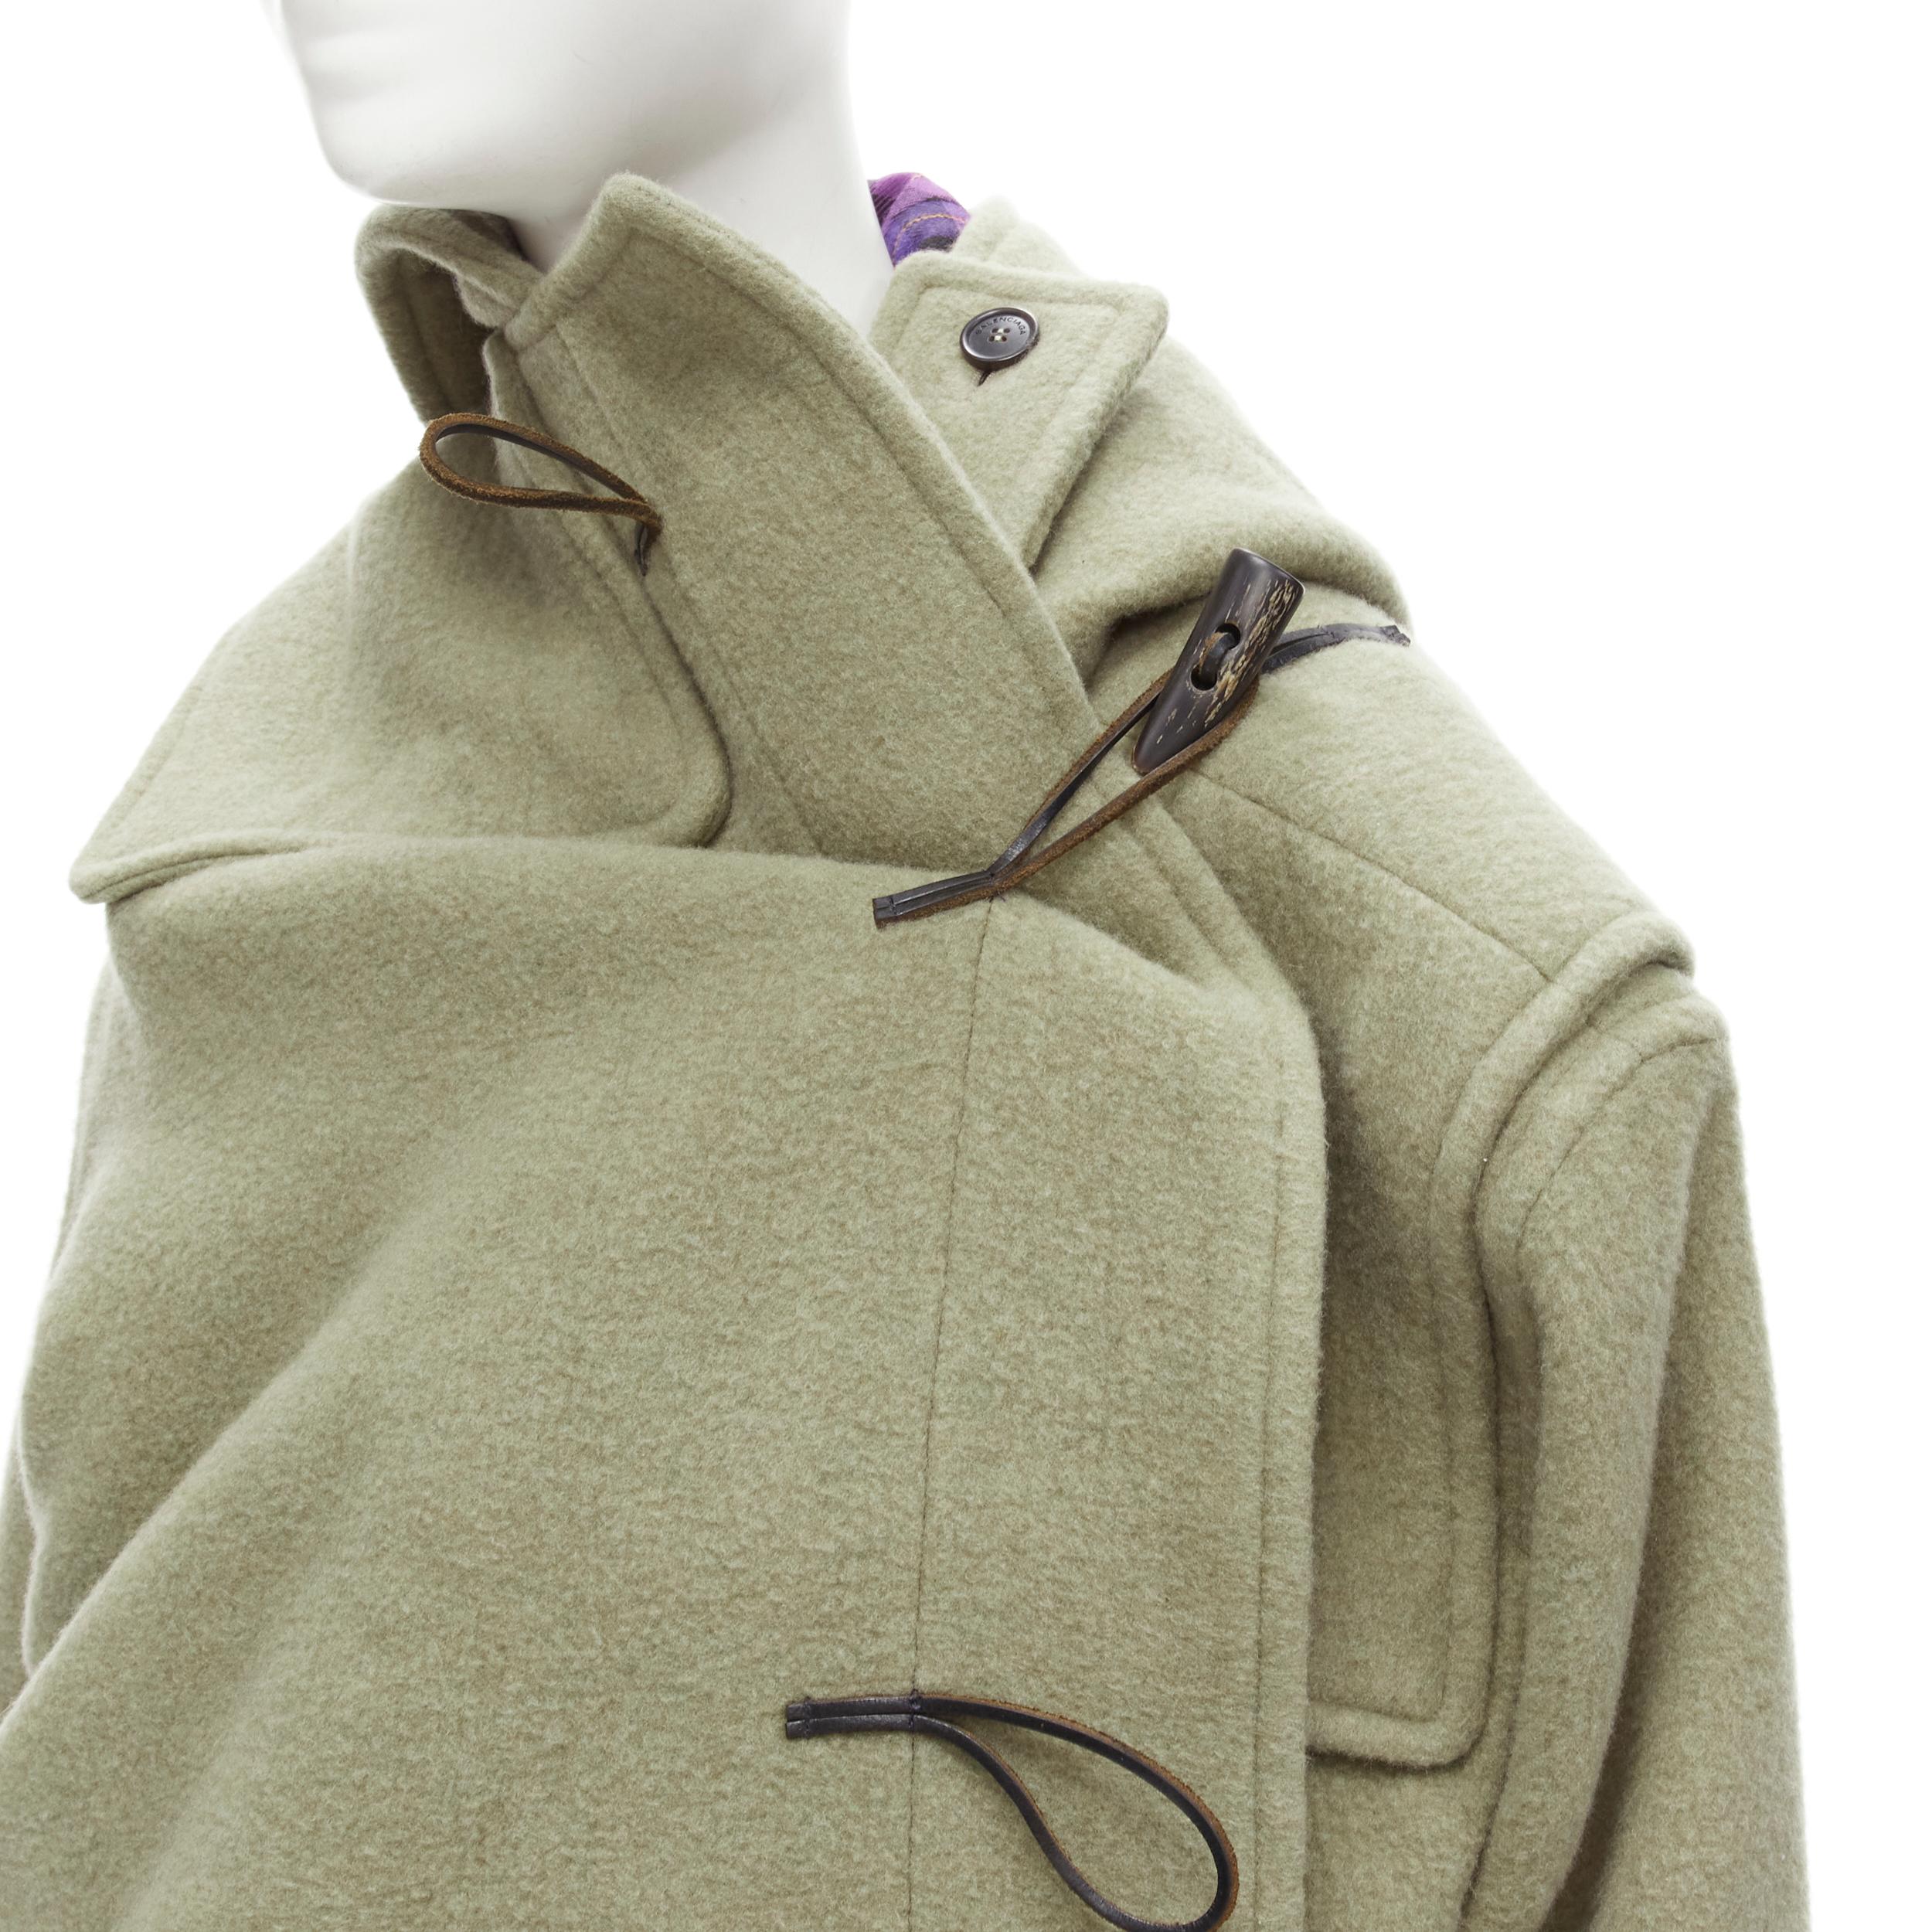 BALENCIAGA 2018 Runway Pulled khaki grey toggle wrap coat M
Brand: Balenciaga
Designer: Demna
Collection: 2018 Puled 
Material: Feels like wool
Color: Green
Pattern: Solid
Closure: Toggle
Extra Detail: Wooden horn toggle buttons. Signle toggle